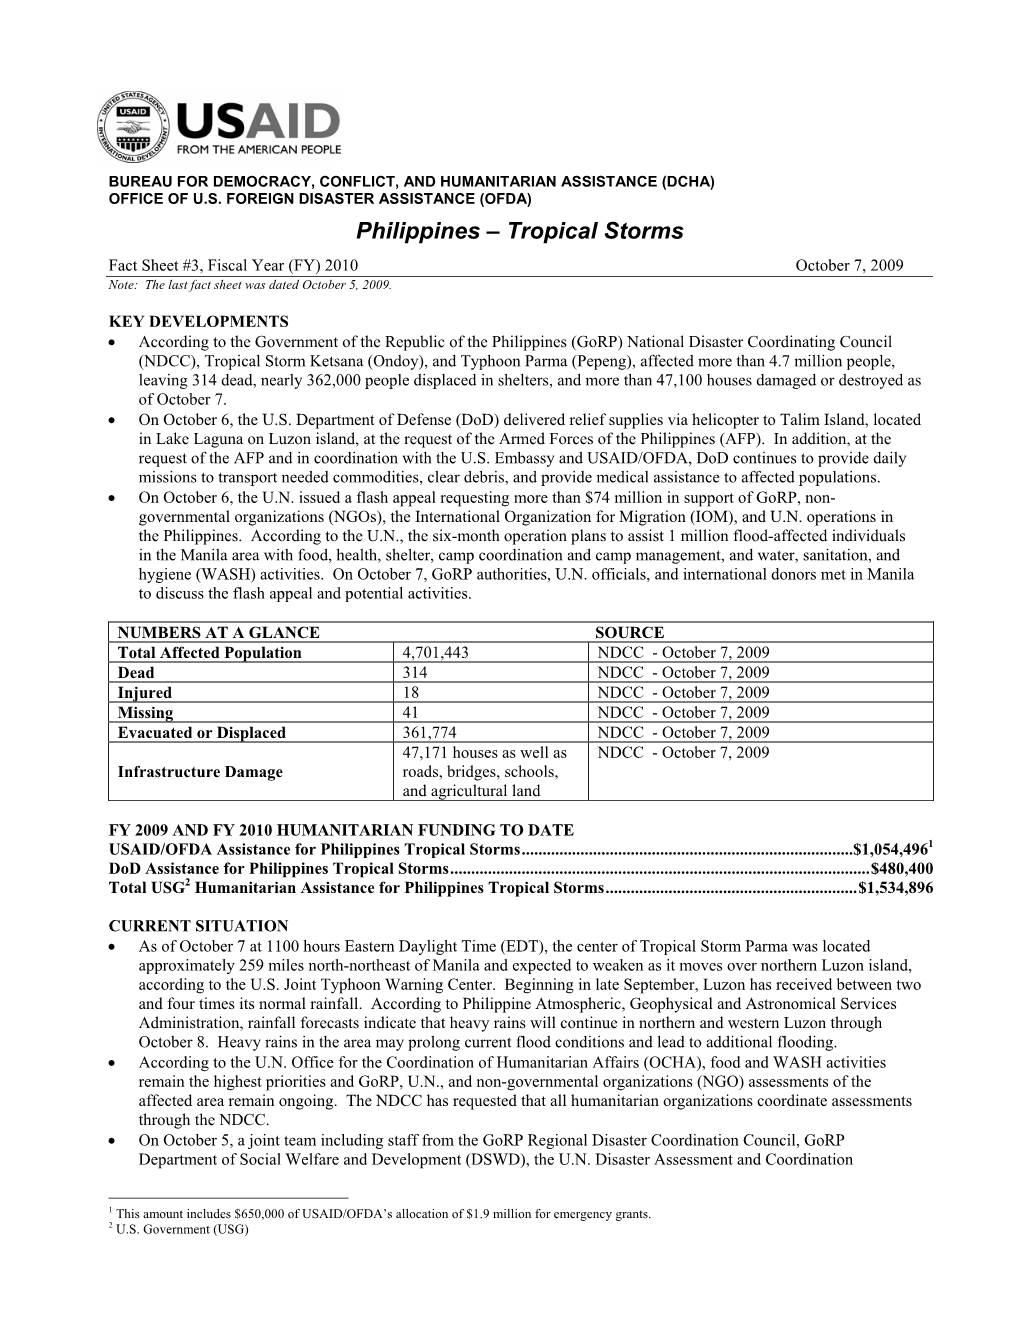 OFDA Philippines Tropical Storms Fact Sheet #3 10/07/2009